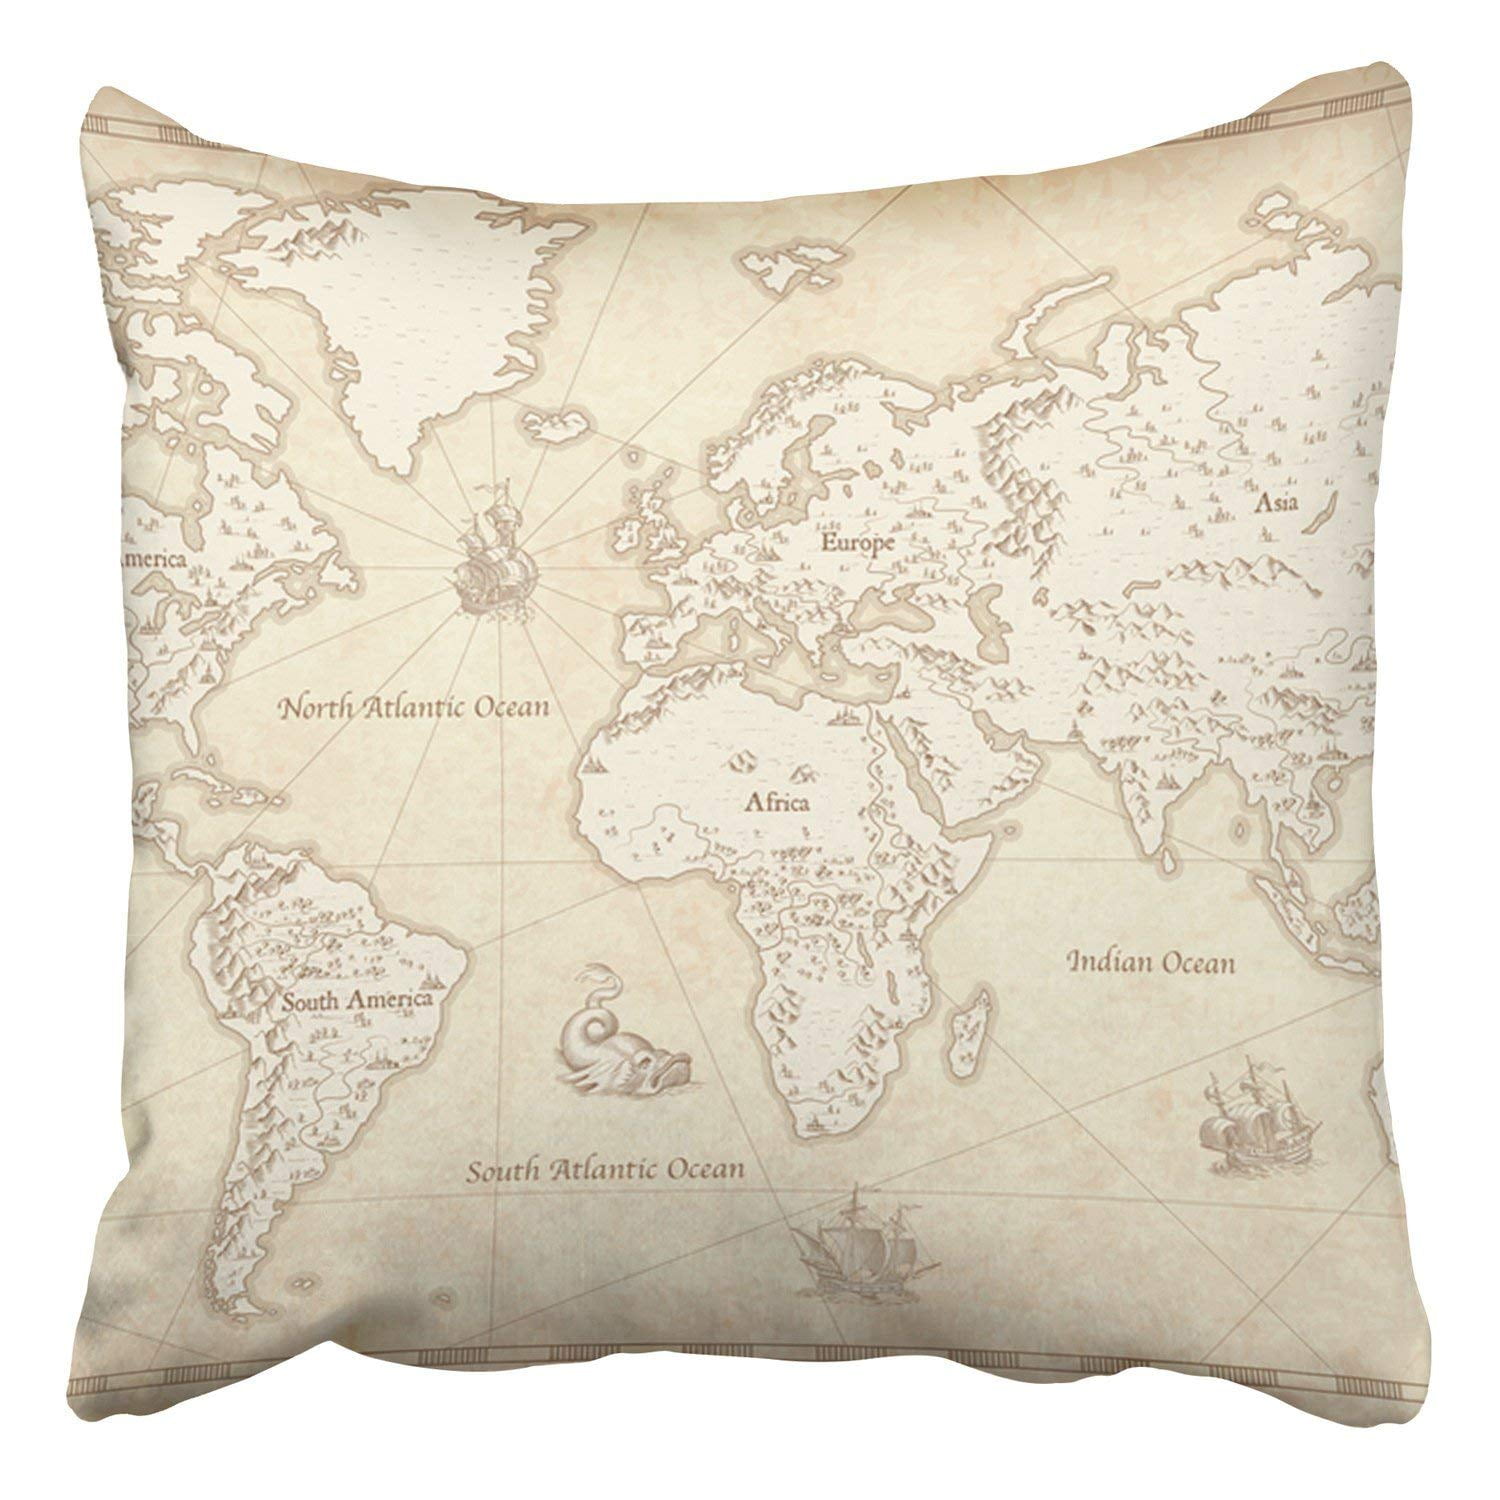 ARTJIA Great Detail The World Map In Vintage Style Mountains Trees Cities Pillowcase 20x20 inch